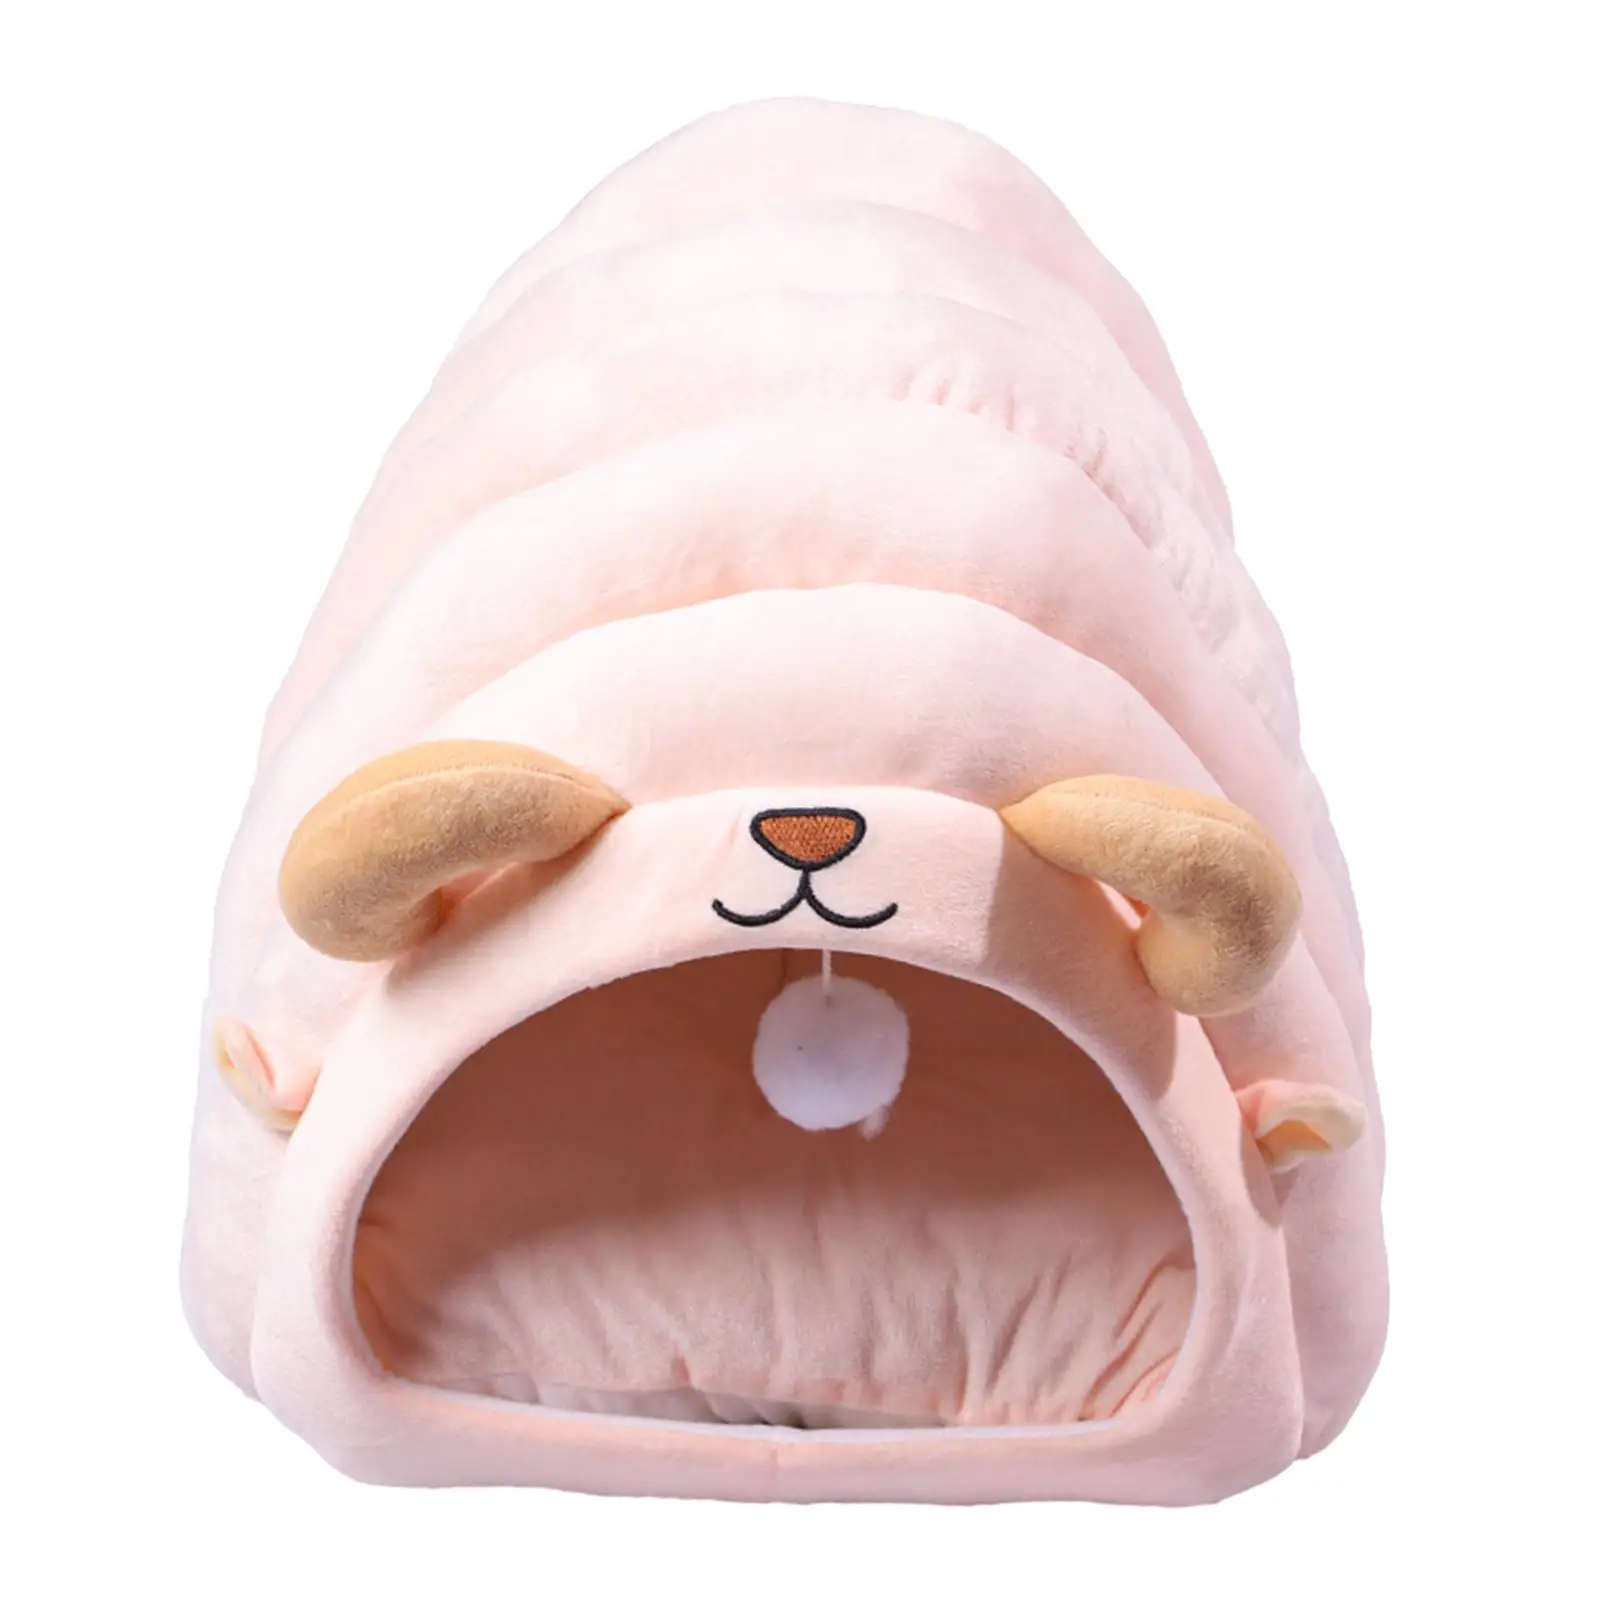 Cat Bed Non Slip Bottom with Removable Mat Washable Cave House Warm Bed Semi Enclosed Cat Nest Sleeping Bed for Rabbits Dogs Cat